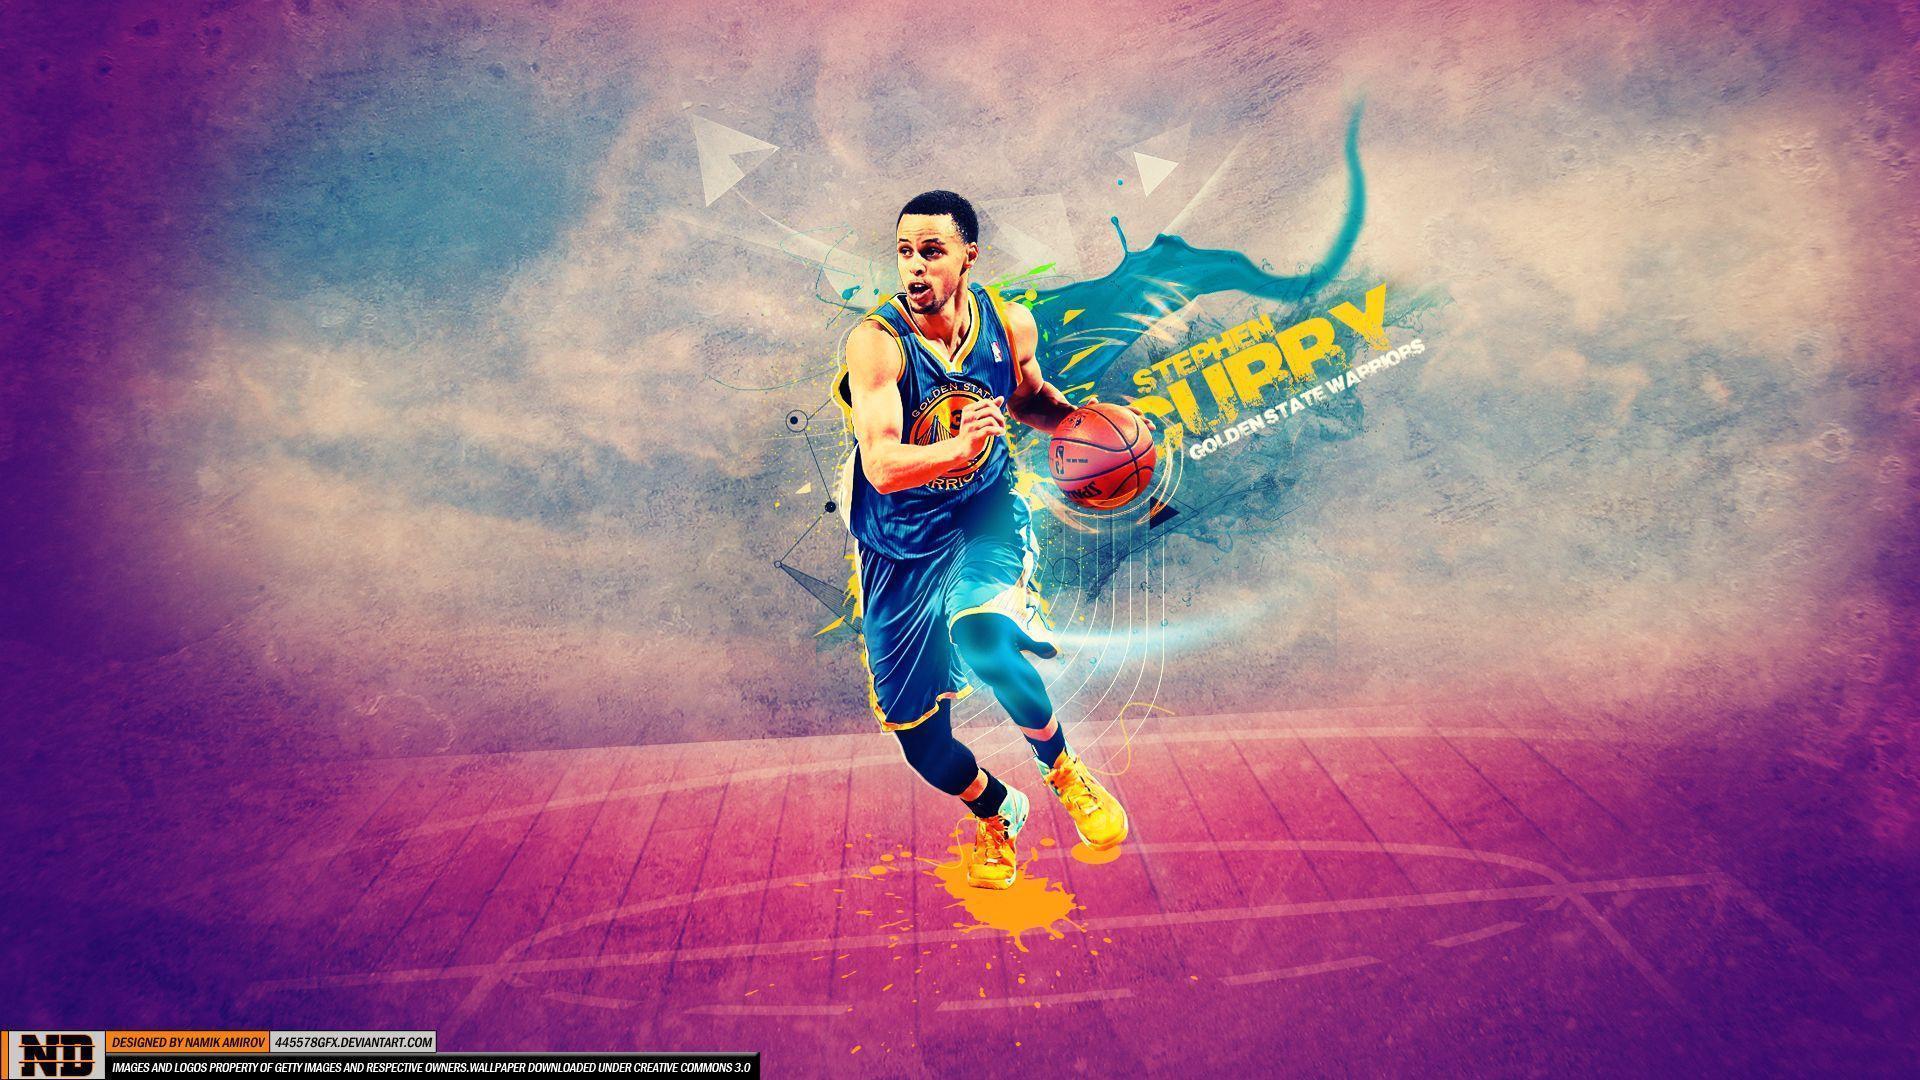 Stephen curry wallpaper, Stephen Curry and Kyrie irving